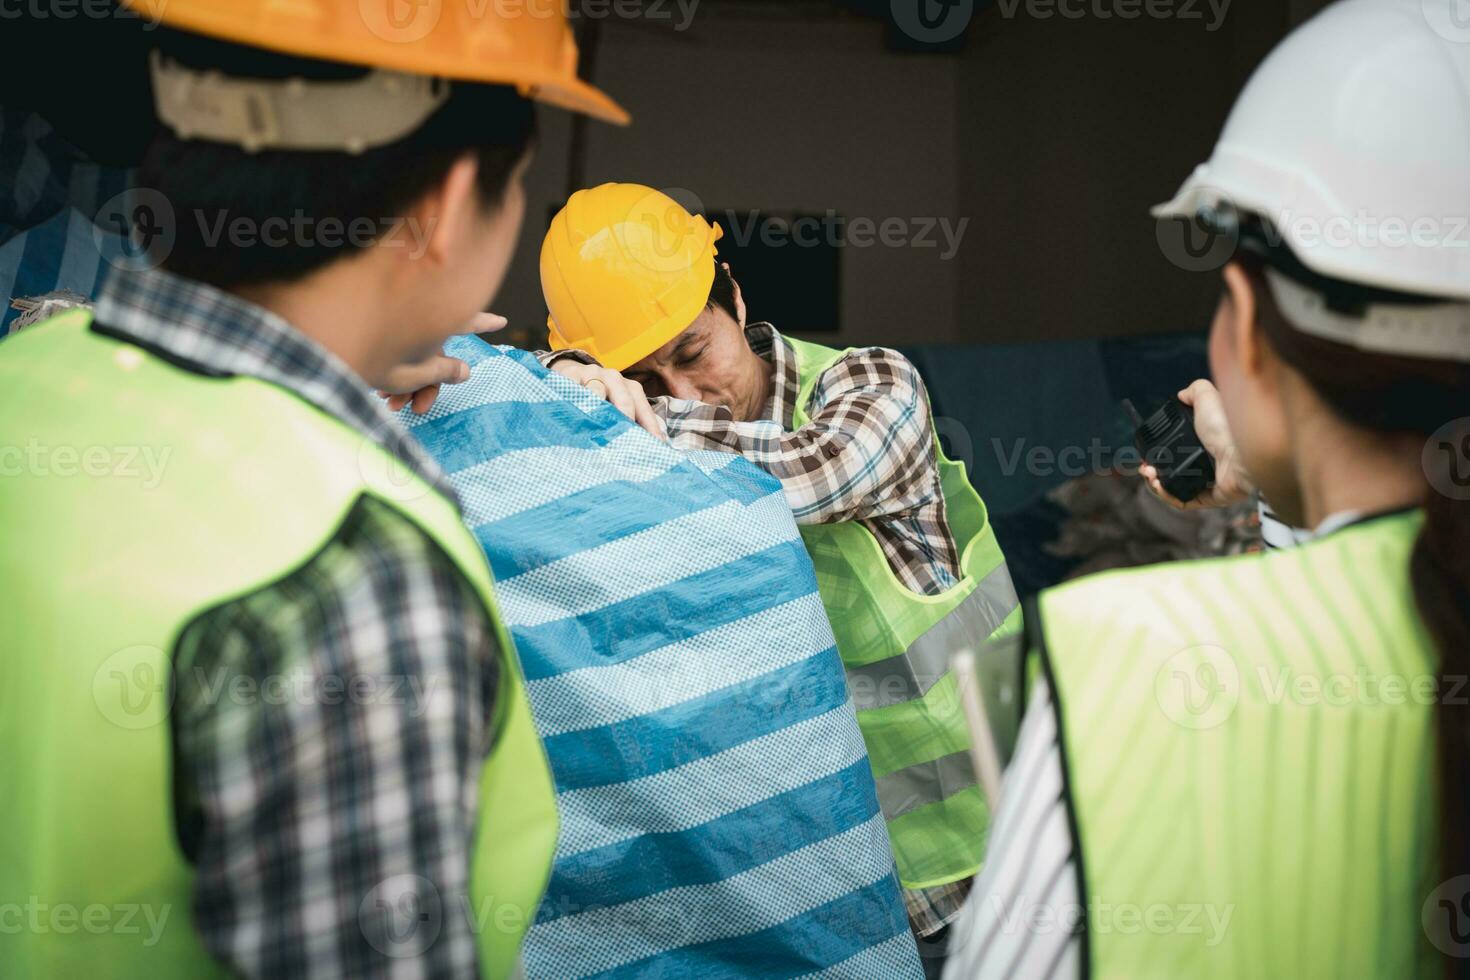 Foreman user radio to nurse for first aid Construction worker faint in construction site because Heat Stroke. Worker with safety helmet take a nap because so are tired from working in the hot sun photo